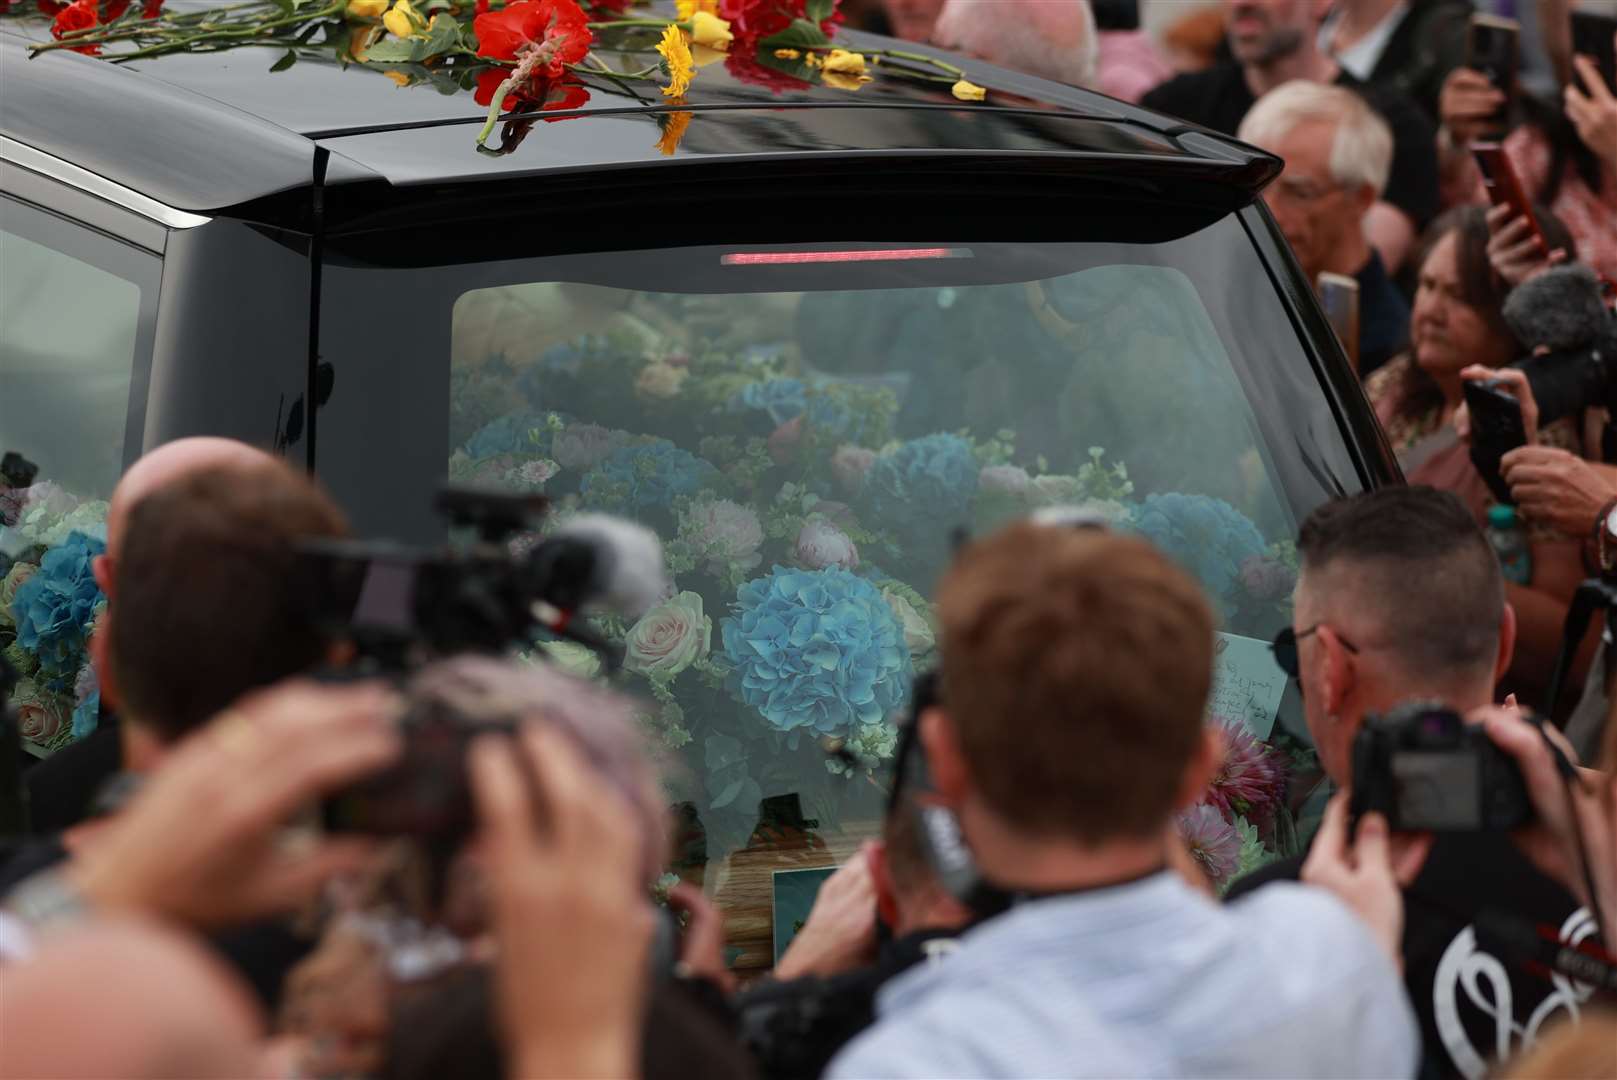 The singer’s funeral cortege passed through her former home town of Bray ahead of a private burial service (Liam McBurney/PA)